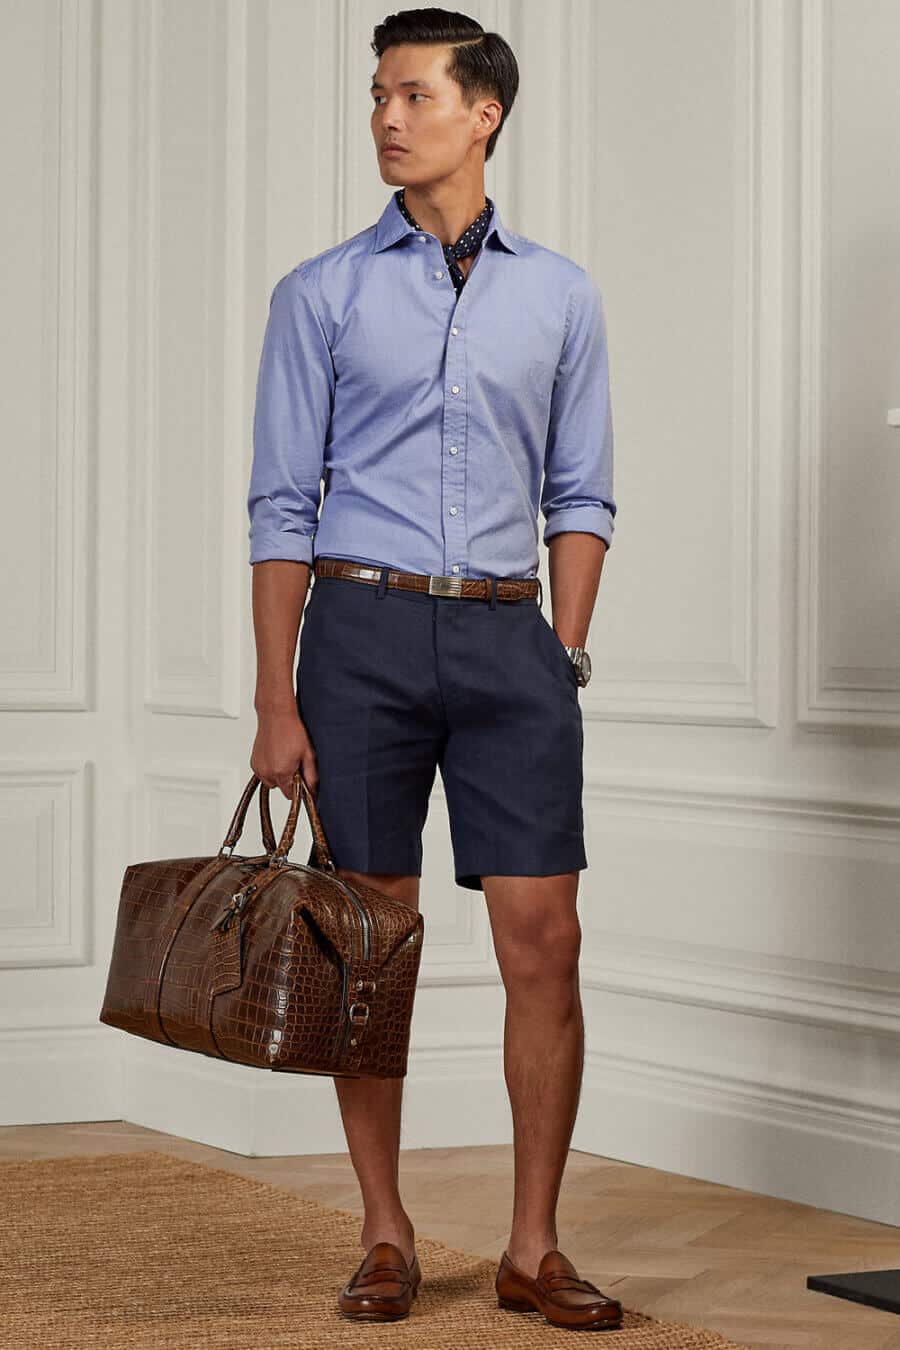 Men's smart casual shorts, shirt and loafers outfit